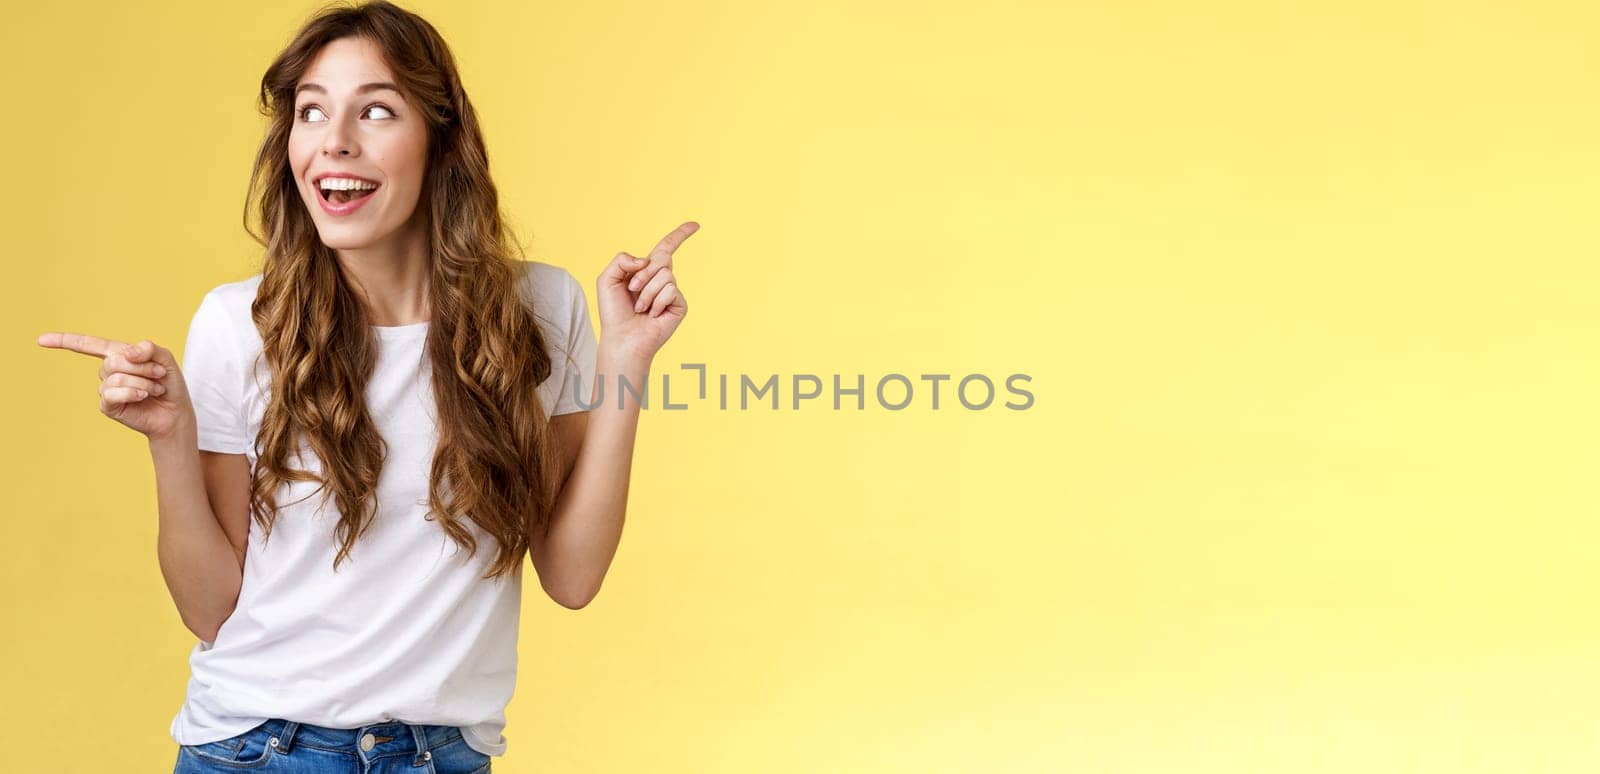 Amused cheerful smiling happy young curly-haired woman chestnut hair observe curiously copy space grinning admiration joy pointing sideways making choice impressed satisfied turn left.